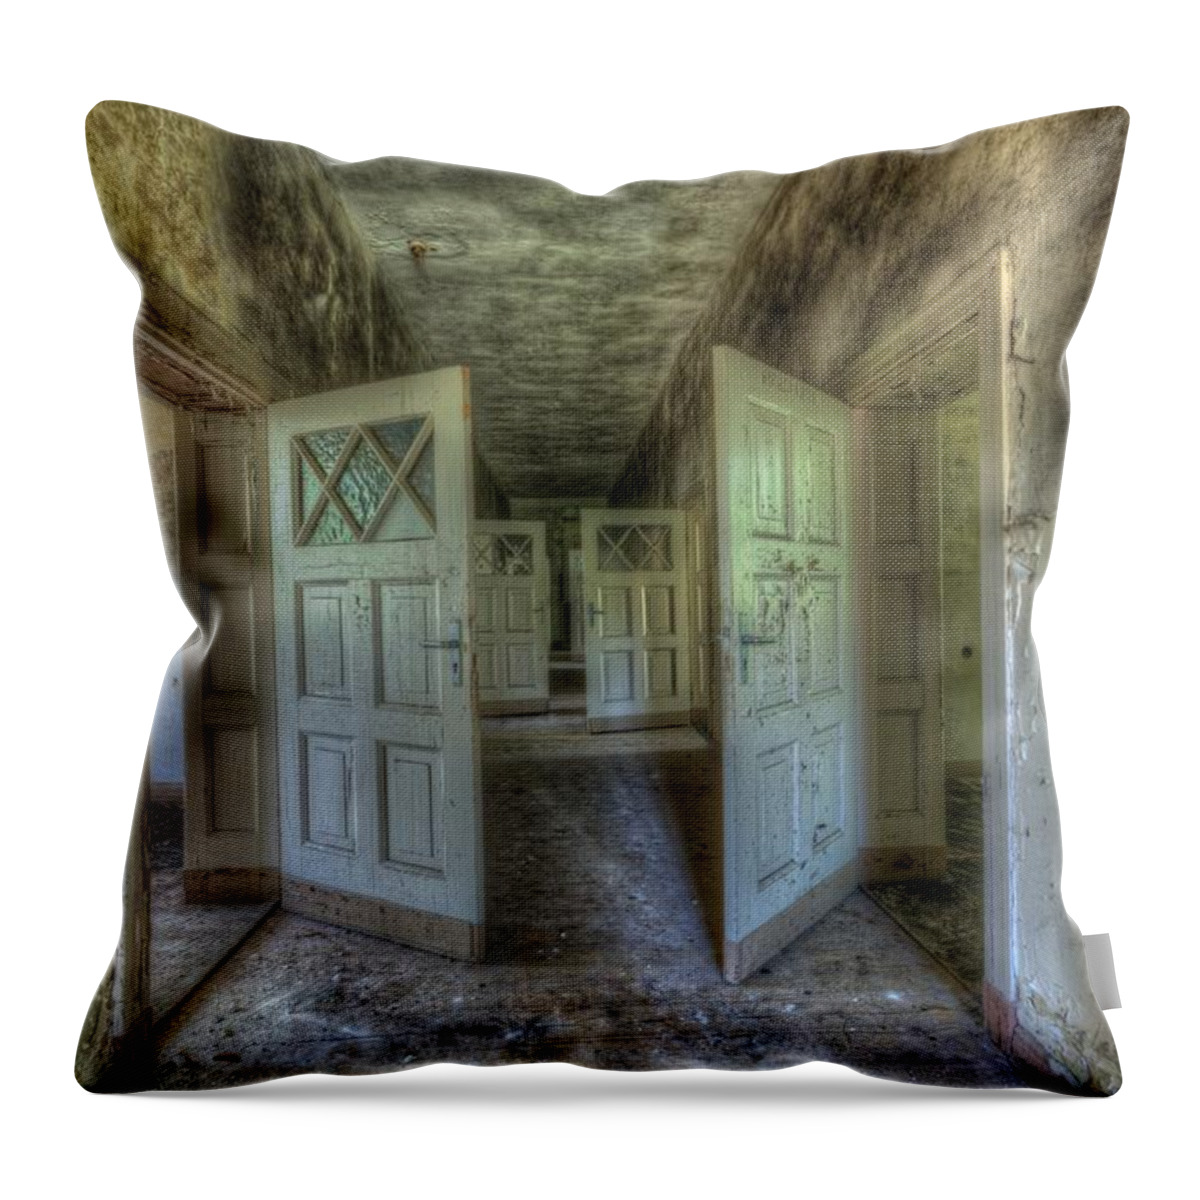 Forgotten Throw Pillow featuring the digital art End of lessons by Nathan Wright